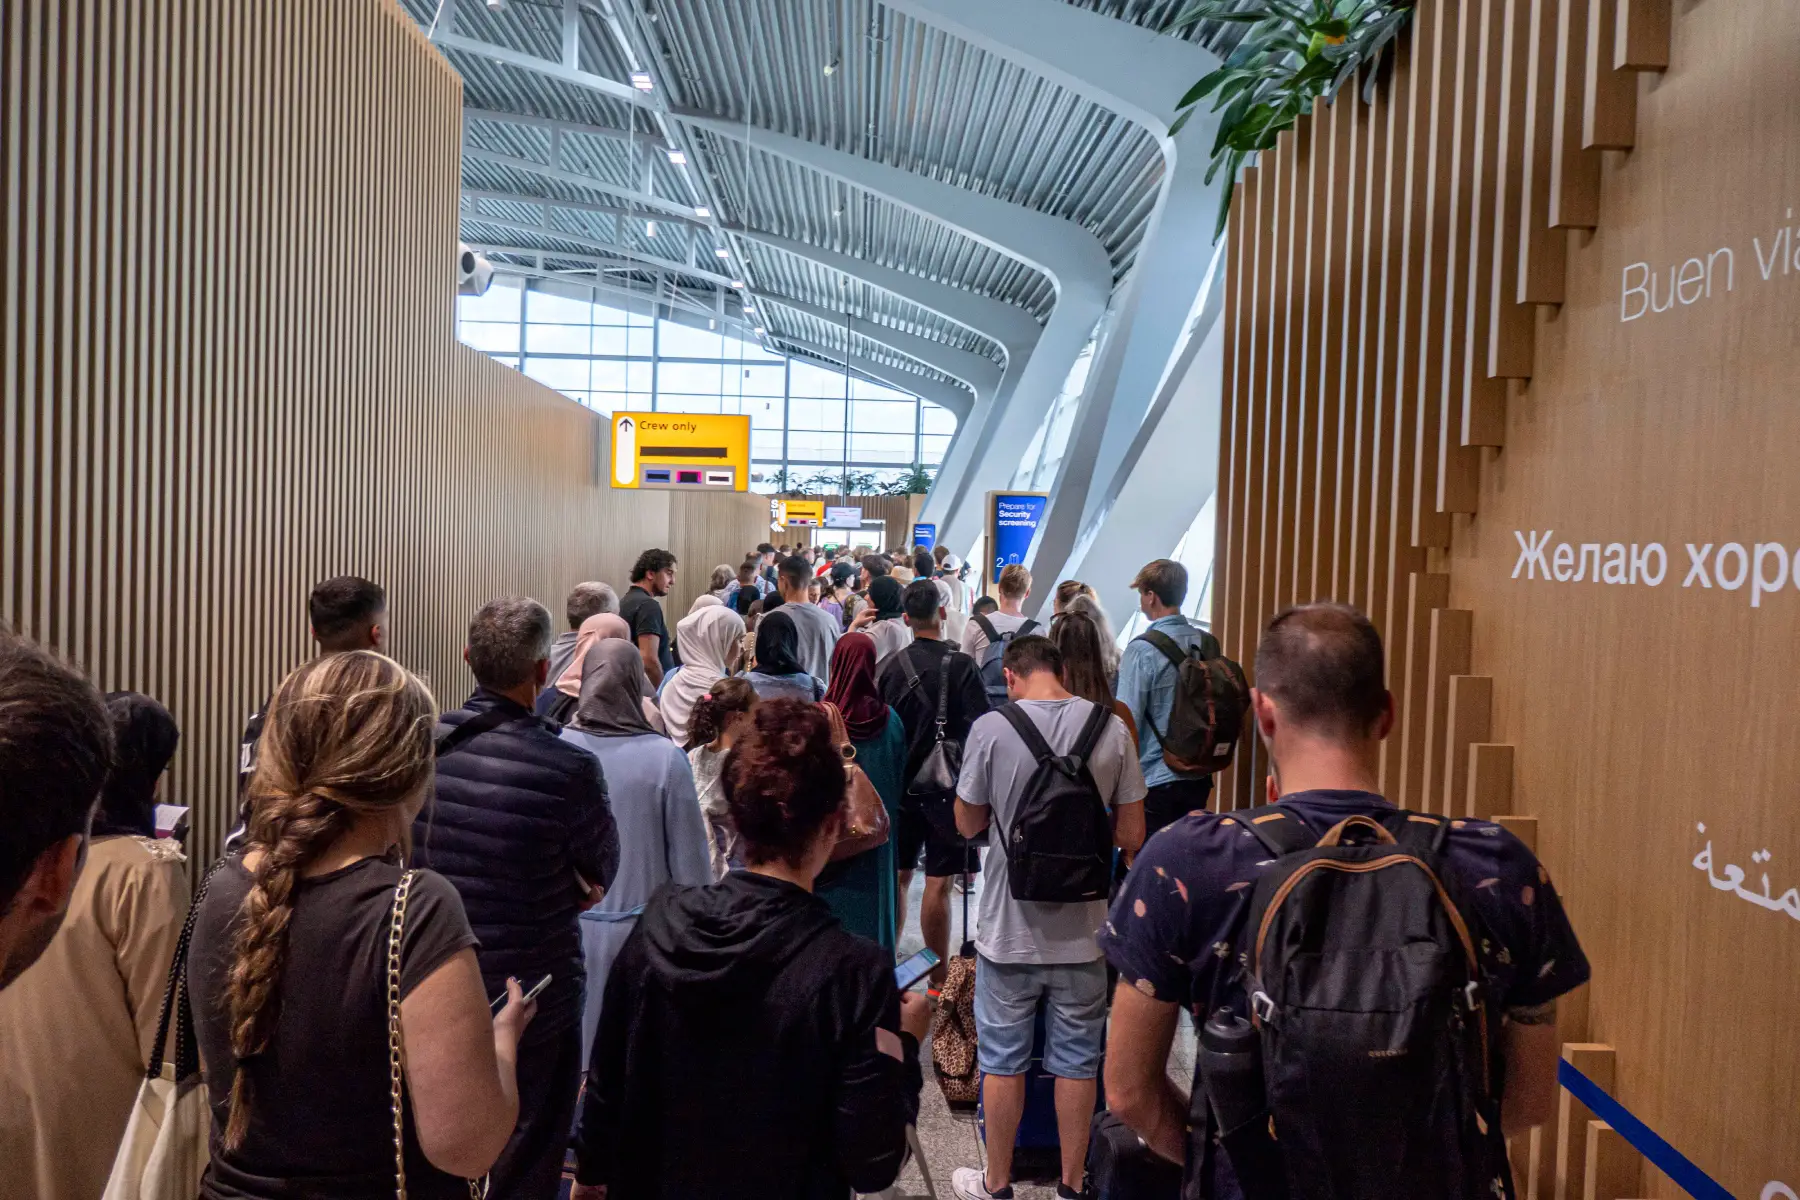 Line forming outside of Eindhoven airport security